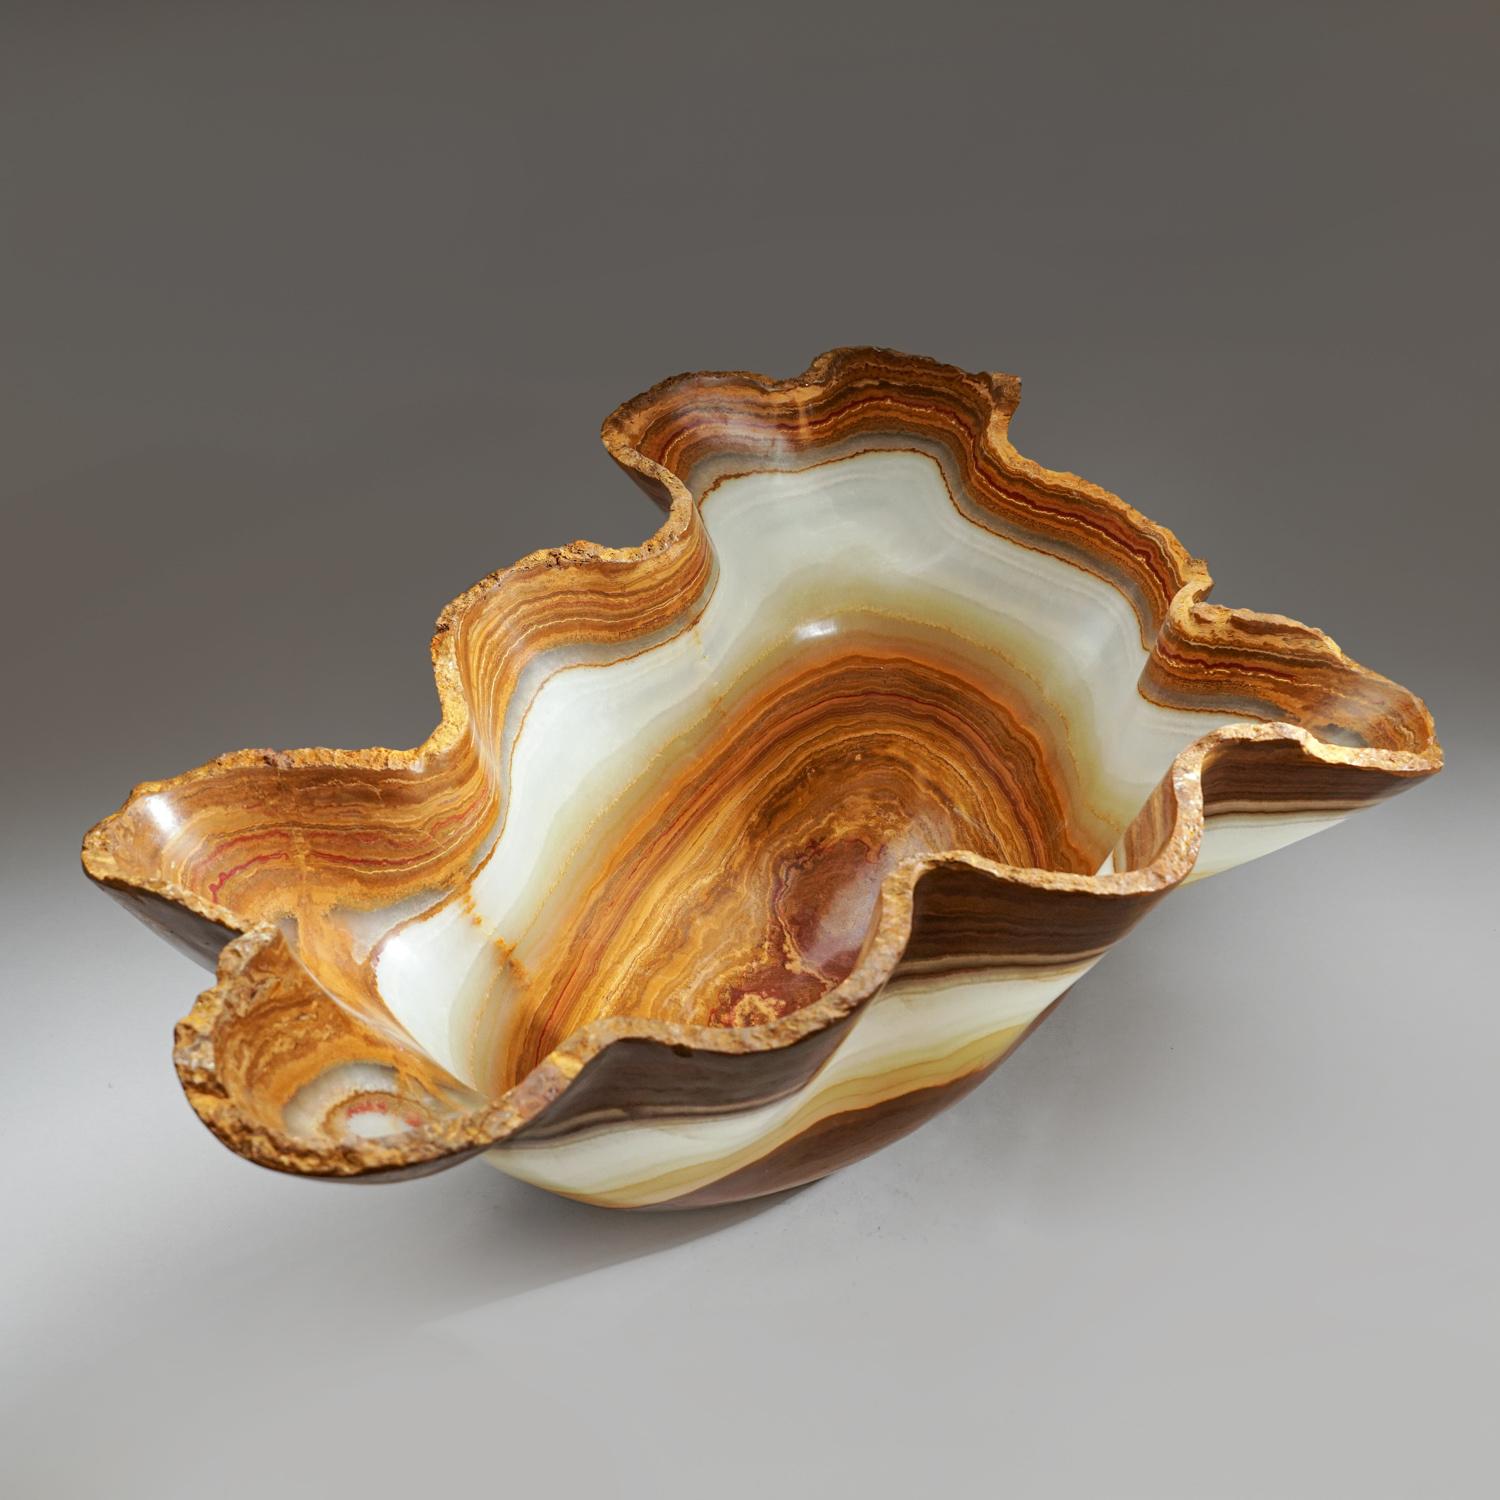 Genuine Polished Onyx Bowl From Mexico (30 lbs)

Large, one-of-a-kind, free-form natural onyx decorative bowl carved out of a single chunk of banded natural onyx. This incredible piece is polished to a mirror finish. This unique piece blends natural